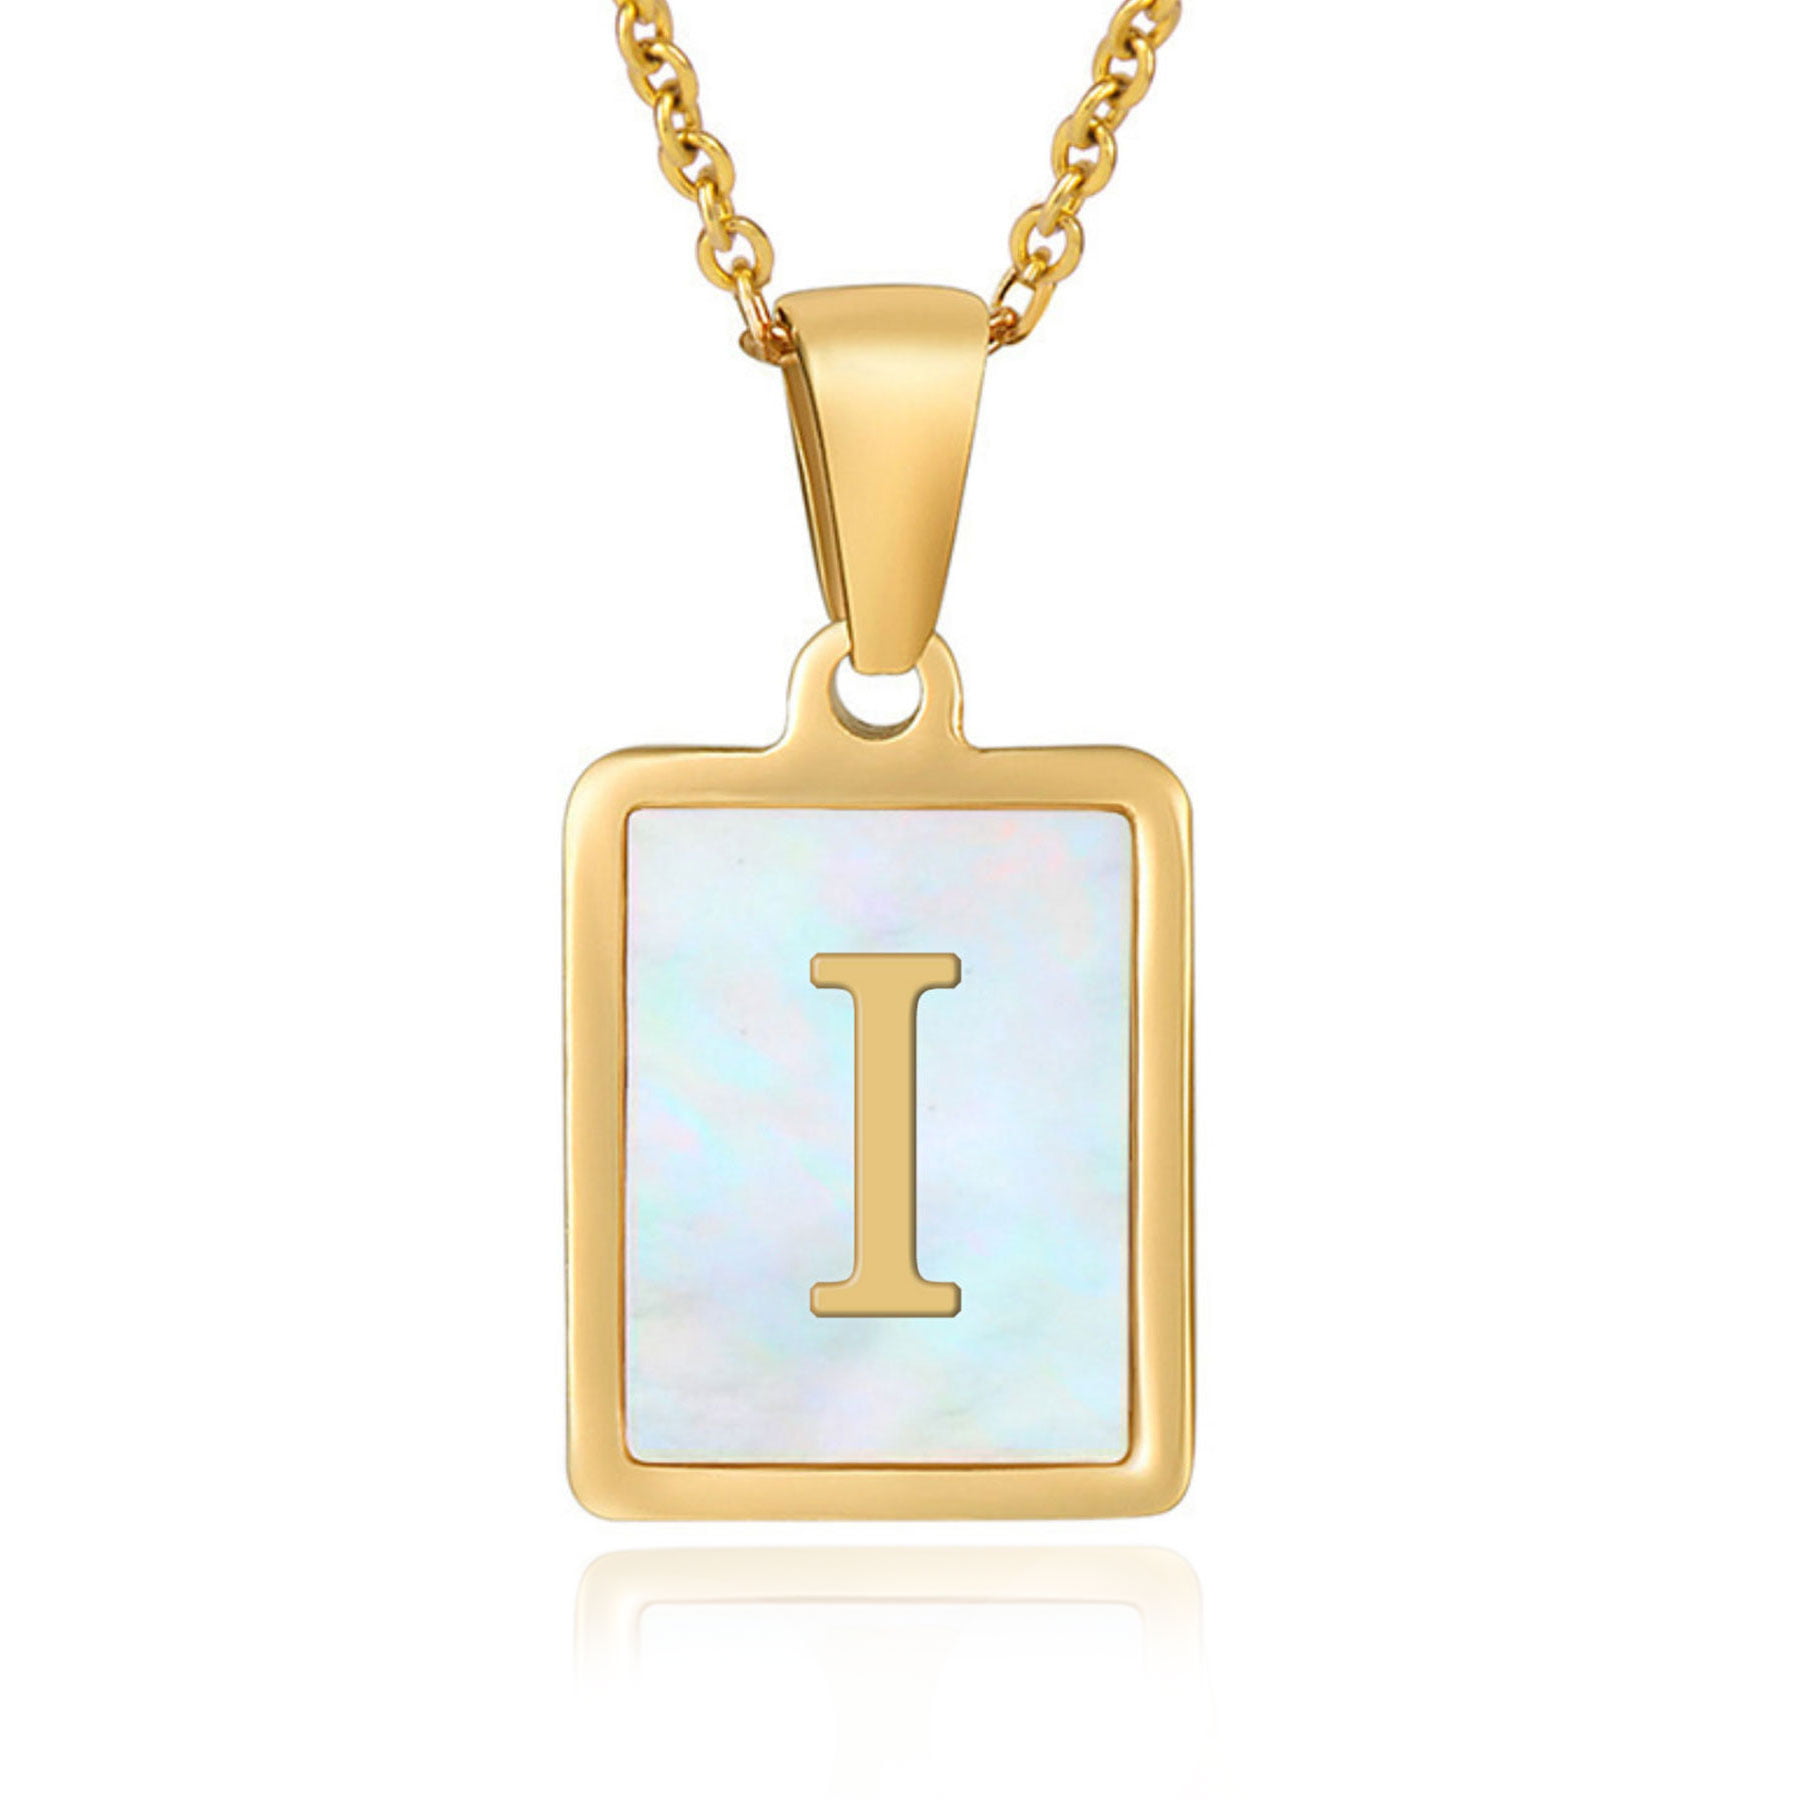 Details about   New Real Solid 14K Gold Classic Automobile Charm Pendant 